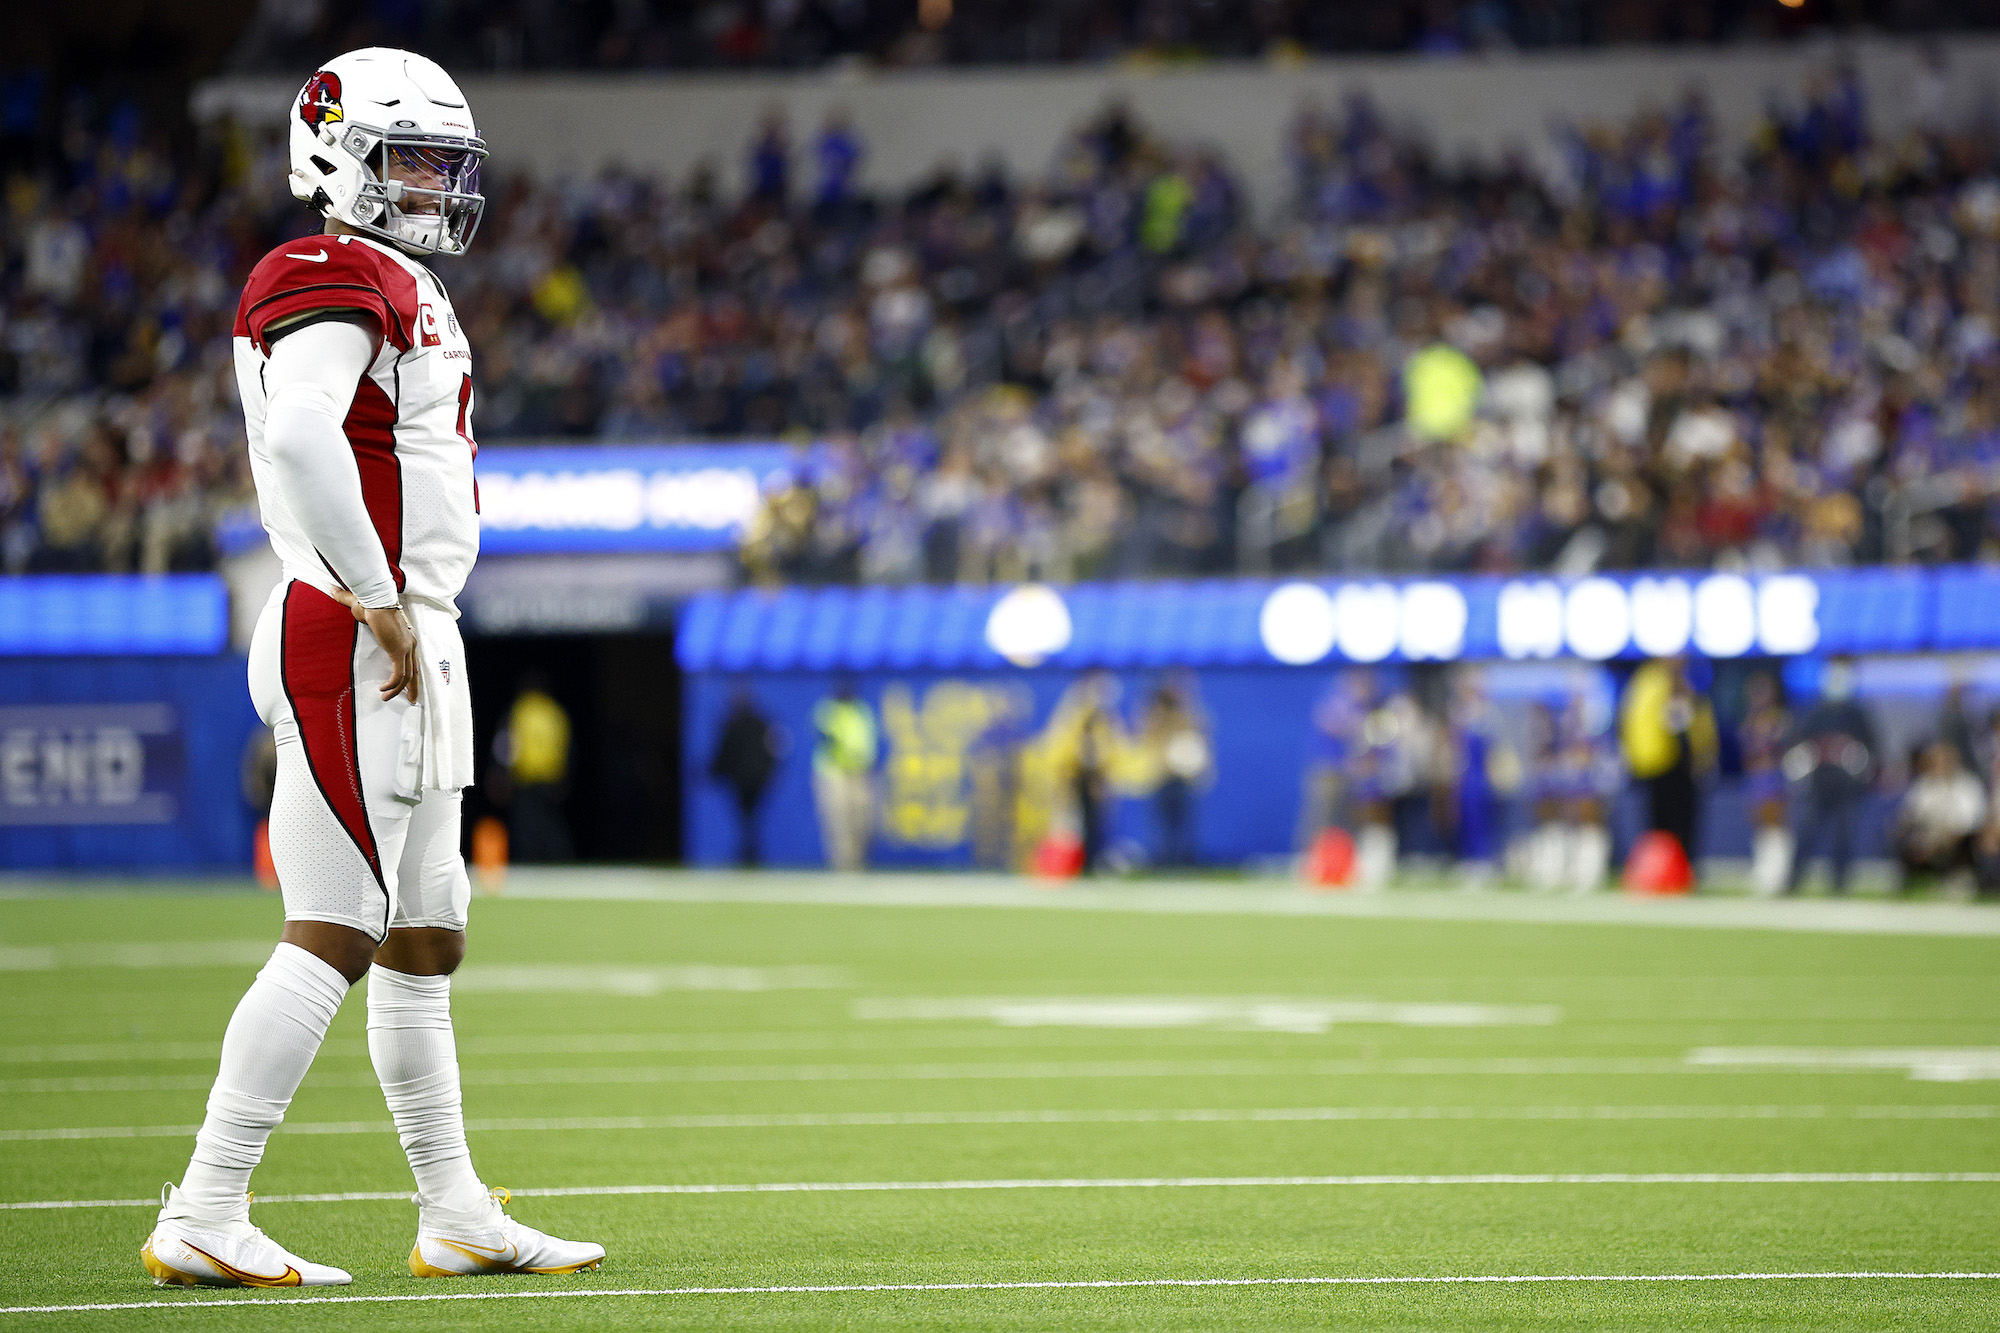 INGLEWOOD, CALIFORNIA - JANUARY 17: Kyler Murray #1 of the Arizona Cardinals looks on during the second quarter of the game against the Los Angeles Rams in the NFC Wild Card Playoff game at SoFi Stadium on January 17, 2022 in Inglewood, California. (Photo by Ronald Martinez/Getty Images)